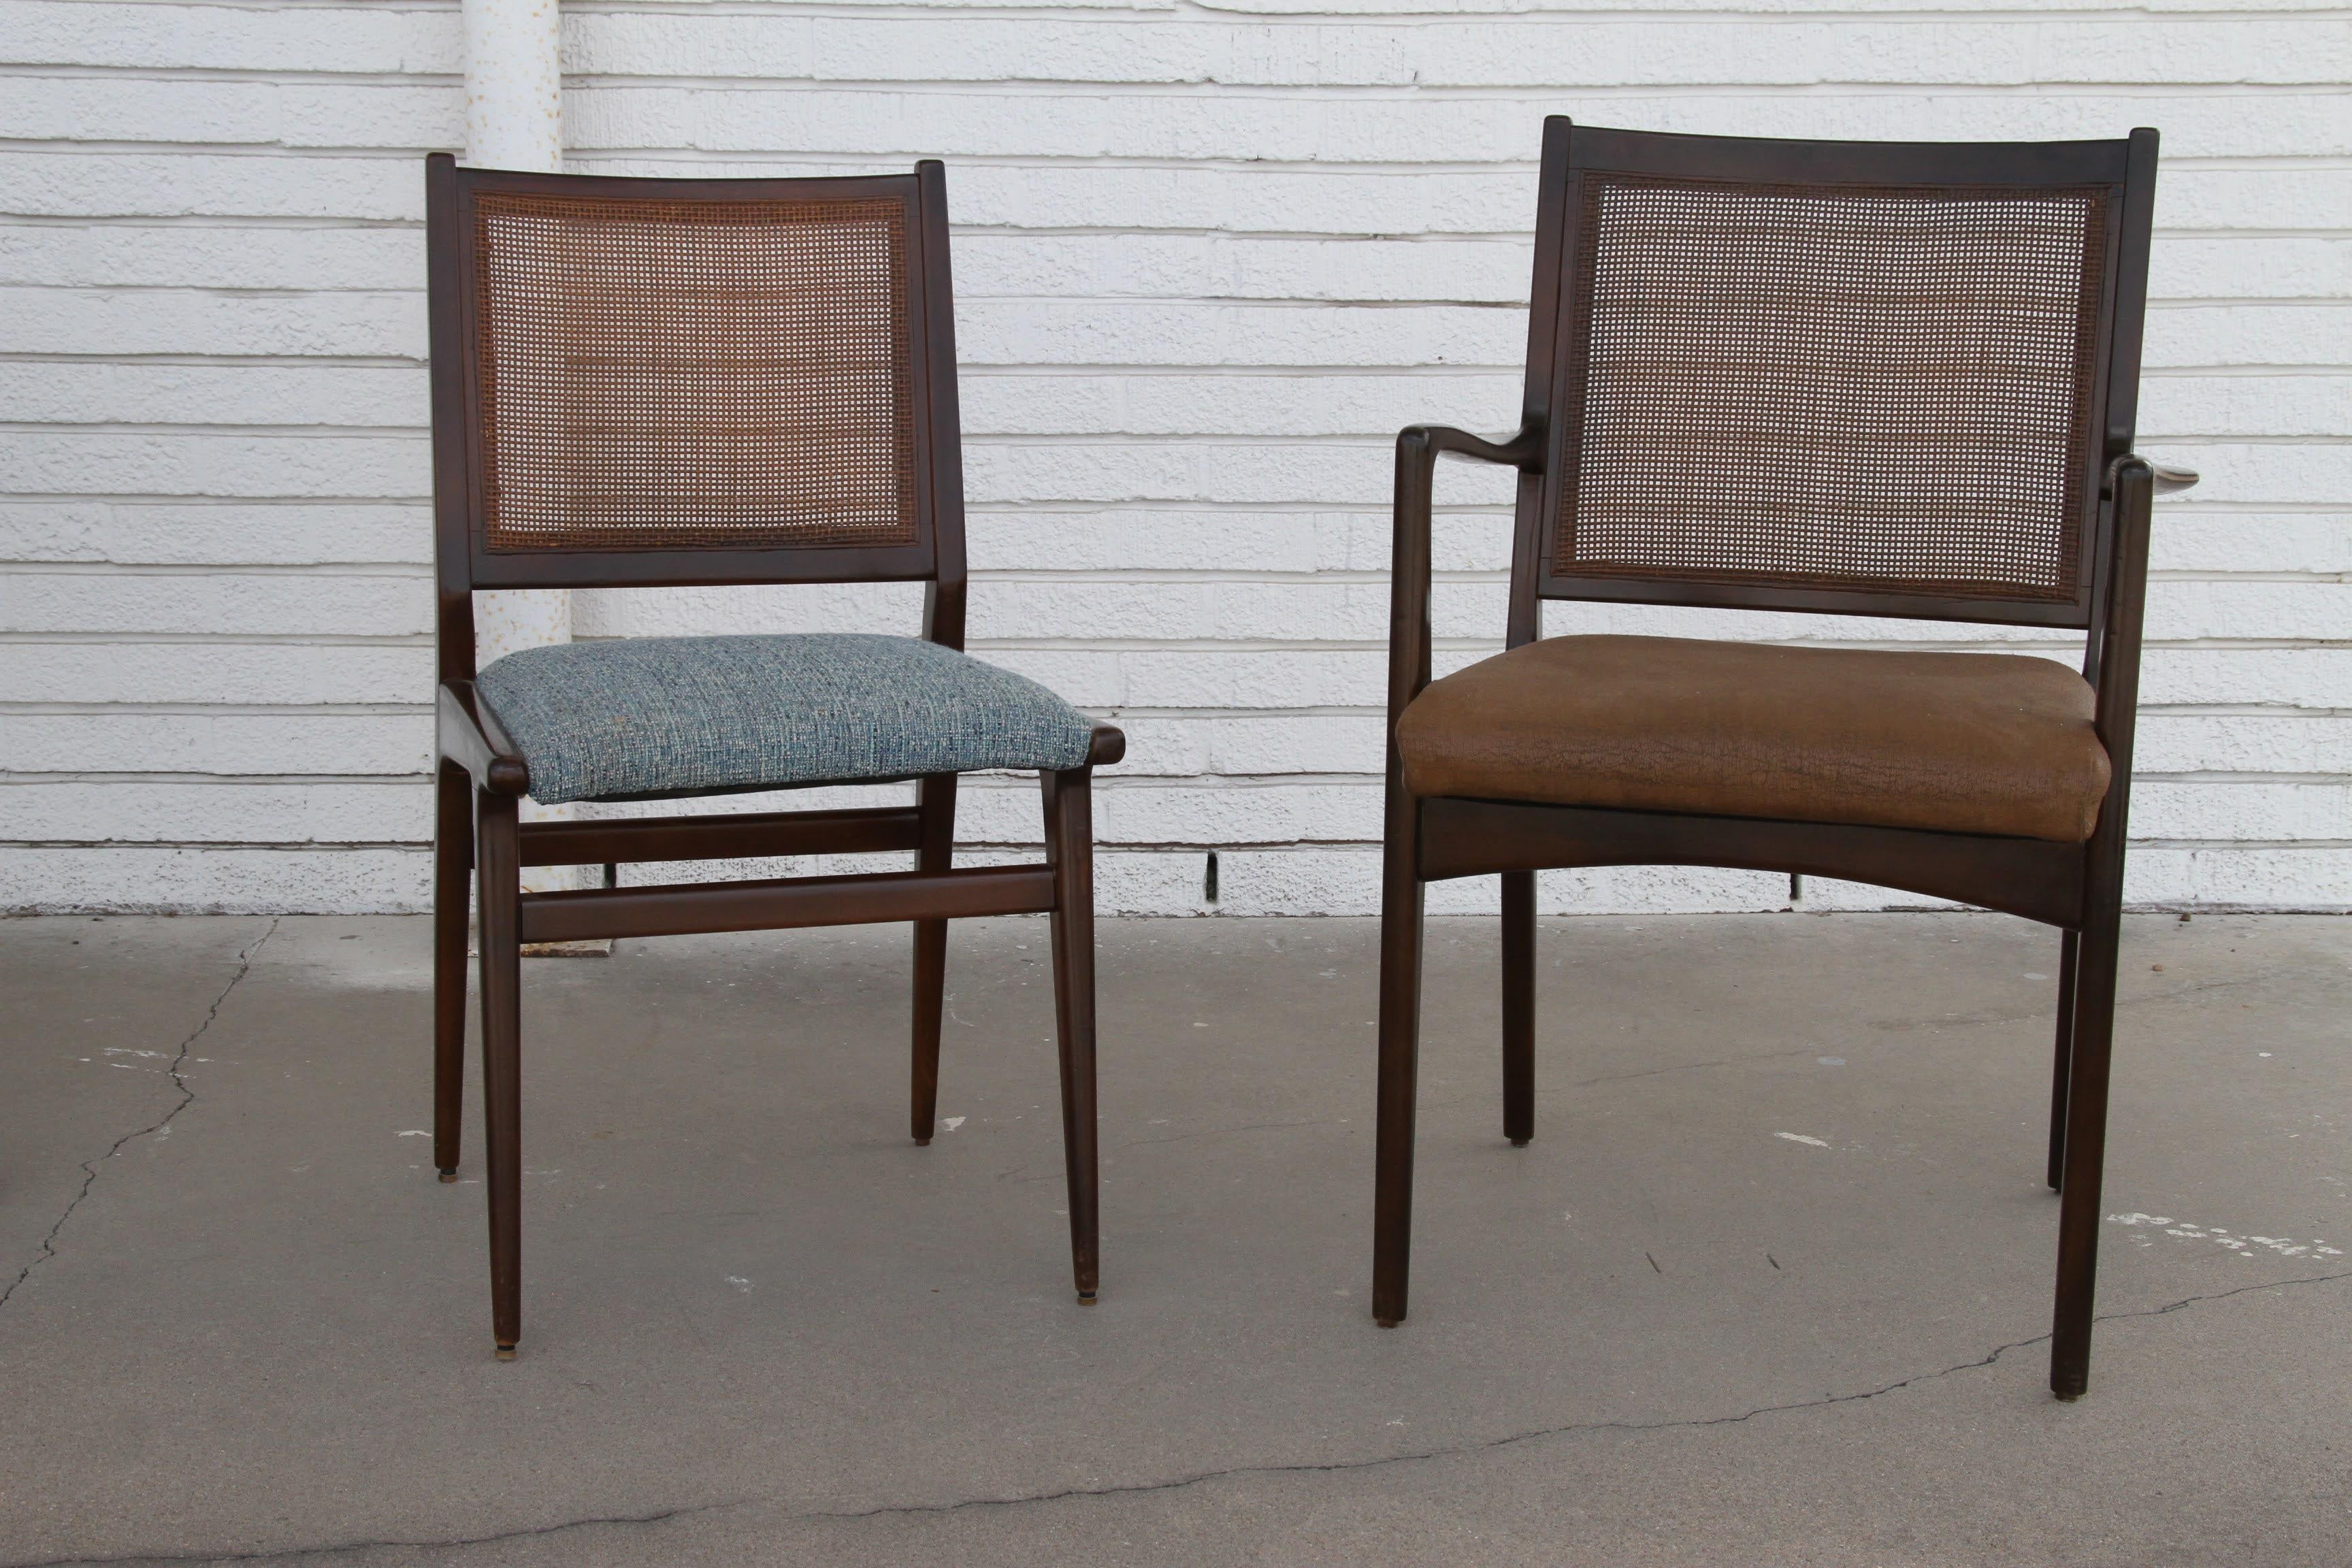 Walnut Set of 6 Swedish Dining Chairs Attributed to Karl Erik Ekselius in Teak and Cane For Sale